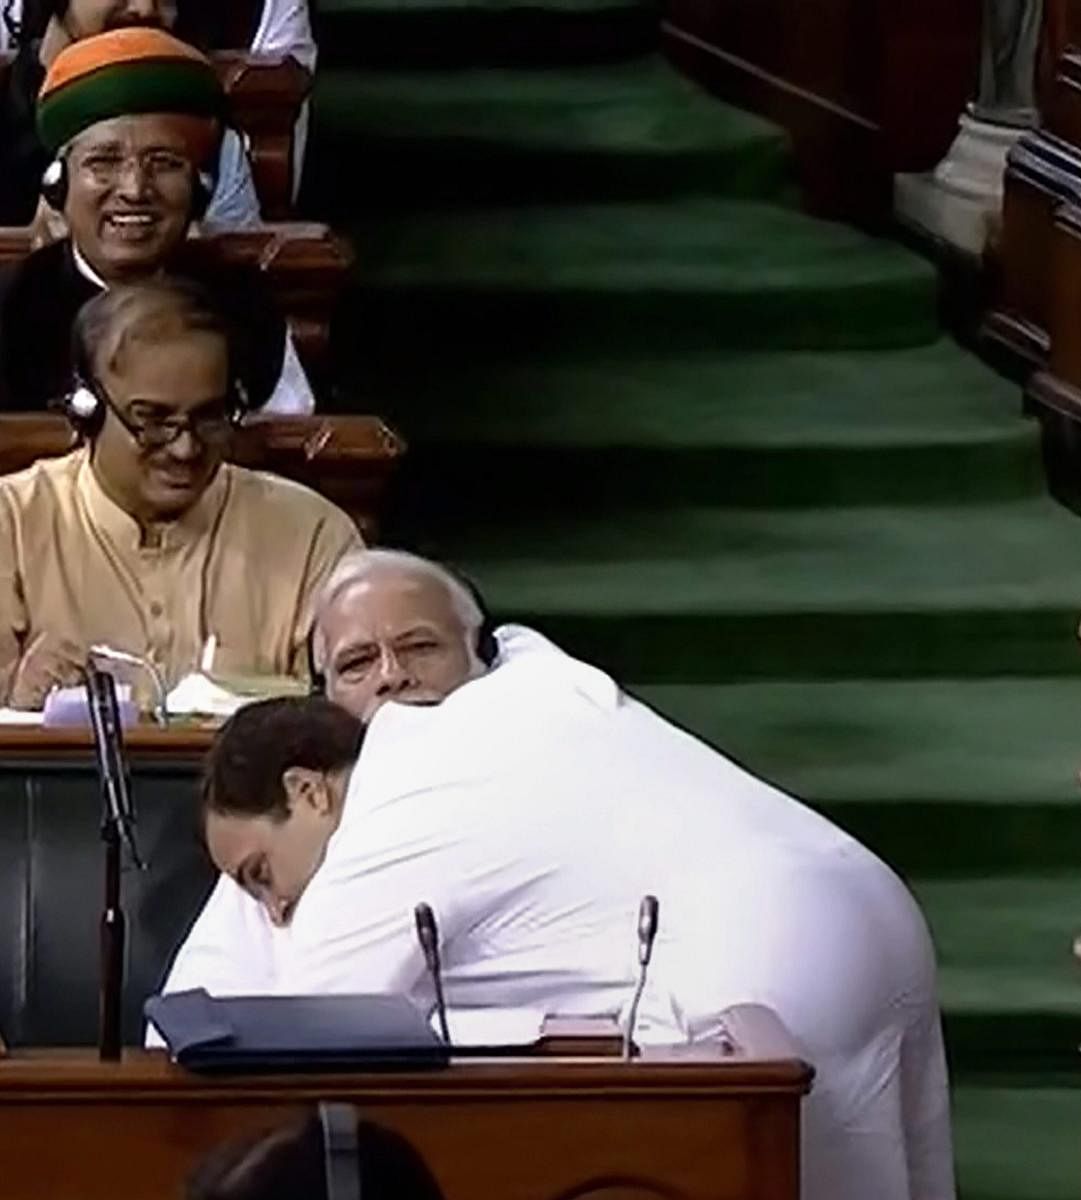 Congress President Rahul Gandhi hugs Prime Minister Narendra Modi after his speech in the Lok Sabha on 'no-confidence motion' during the Monsoon Session of Parliament, in New Delhi on July 20, 2018. PTI